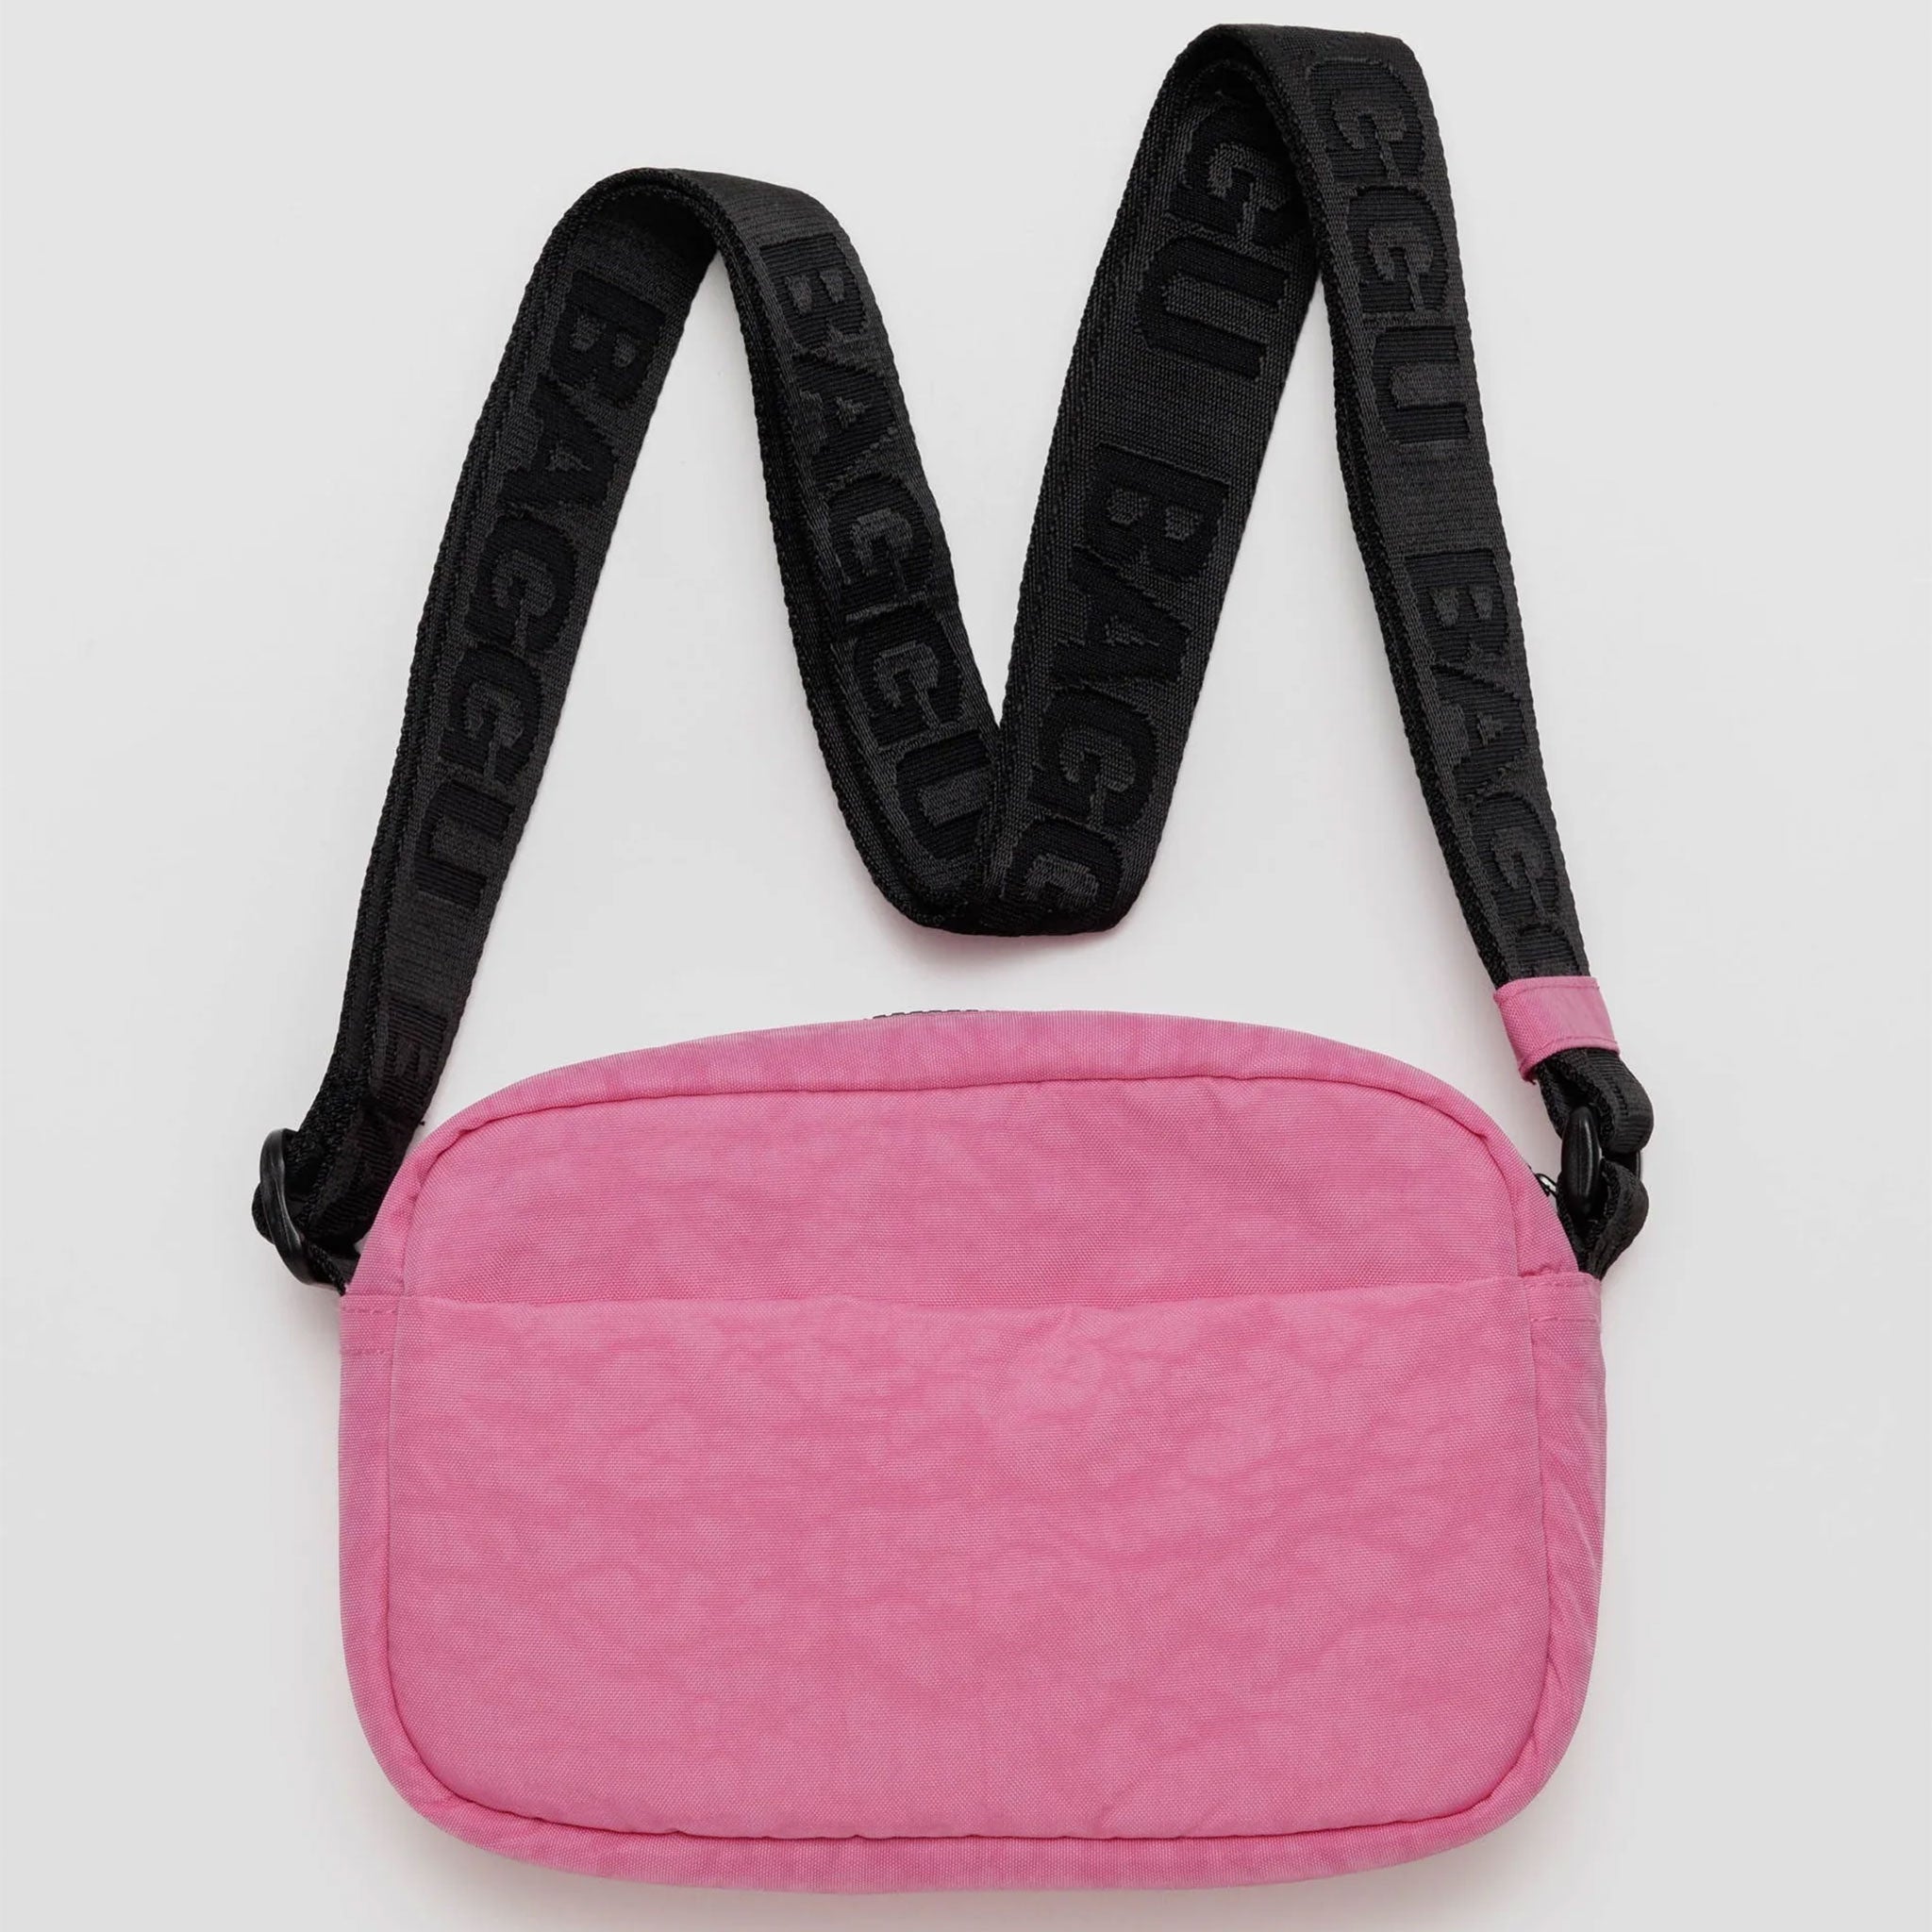 a bright pink rectangle shaped bag with black strap